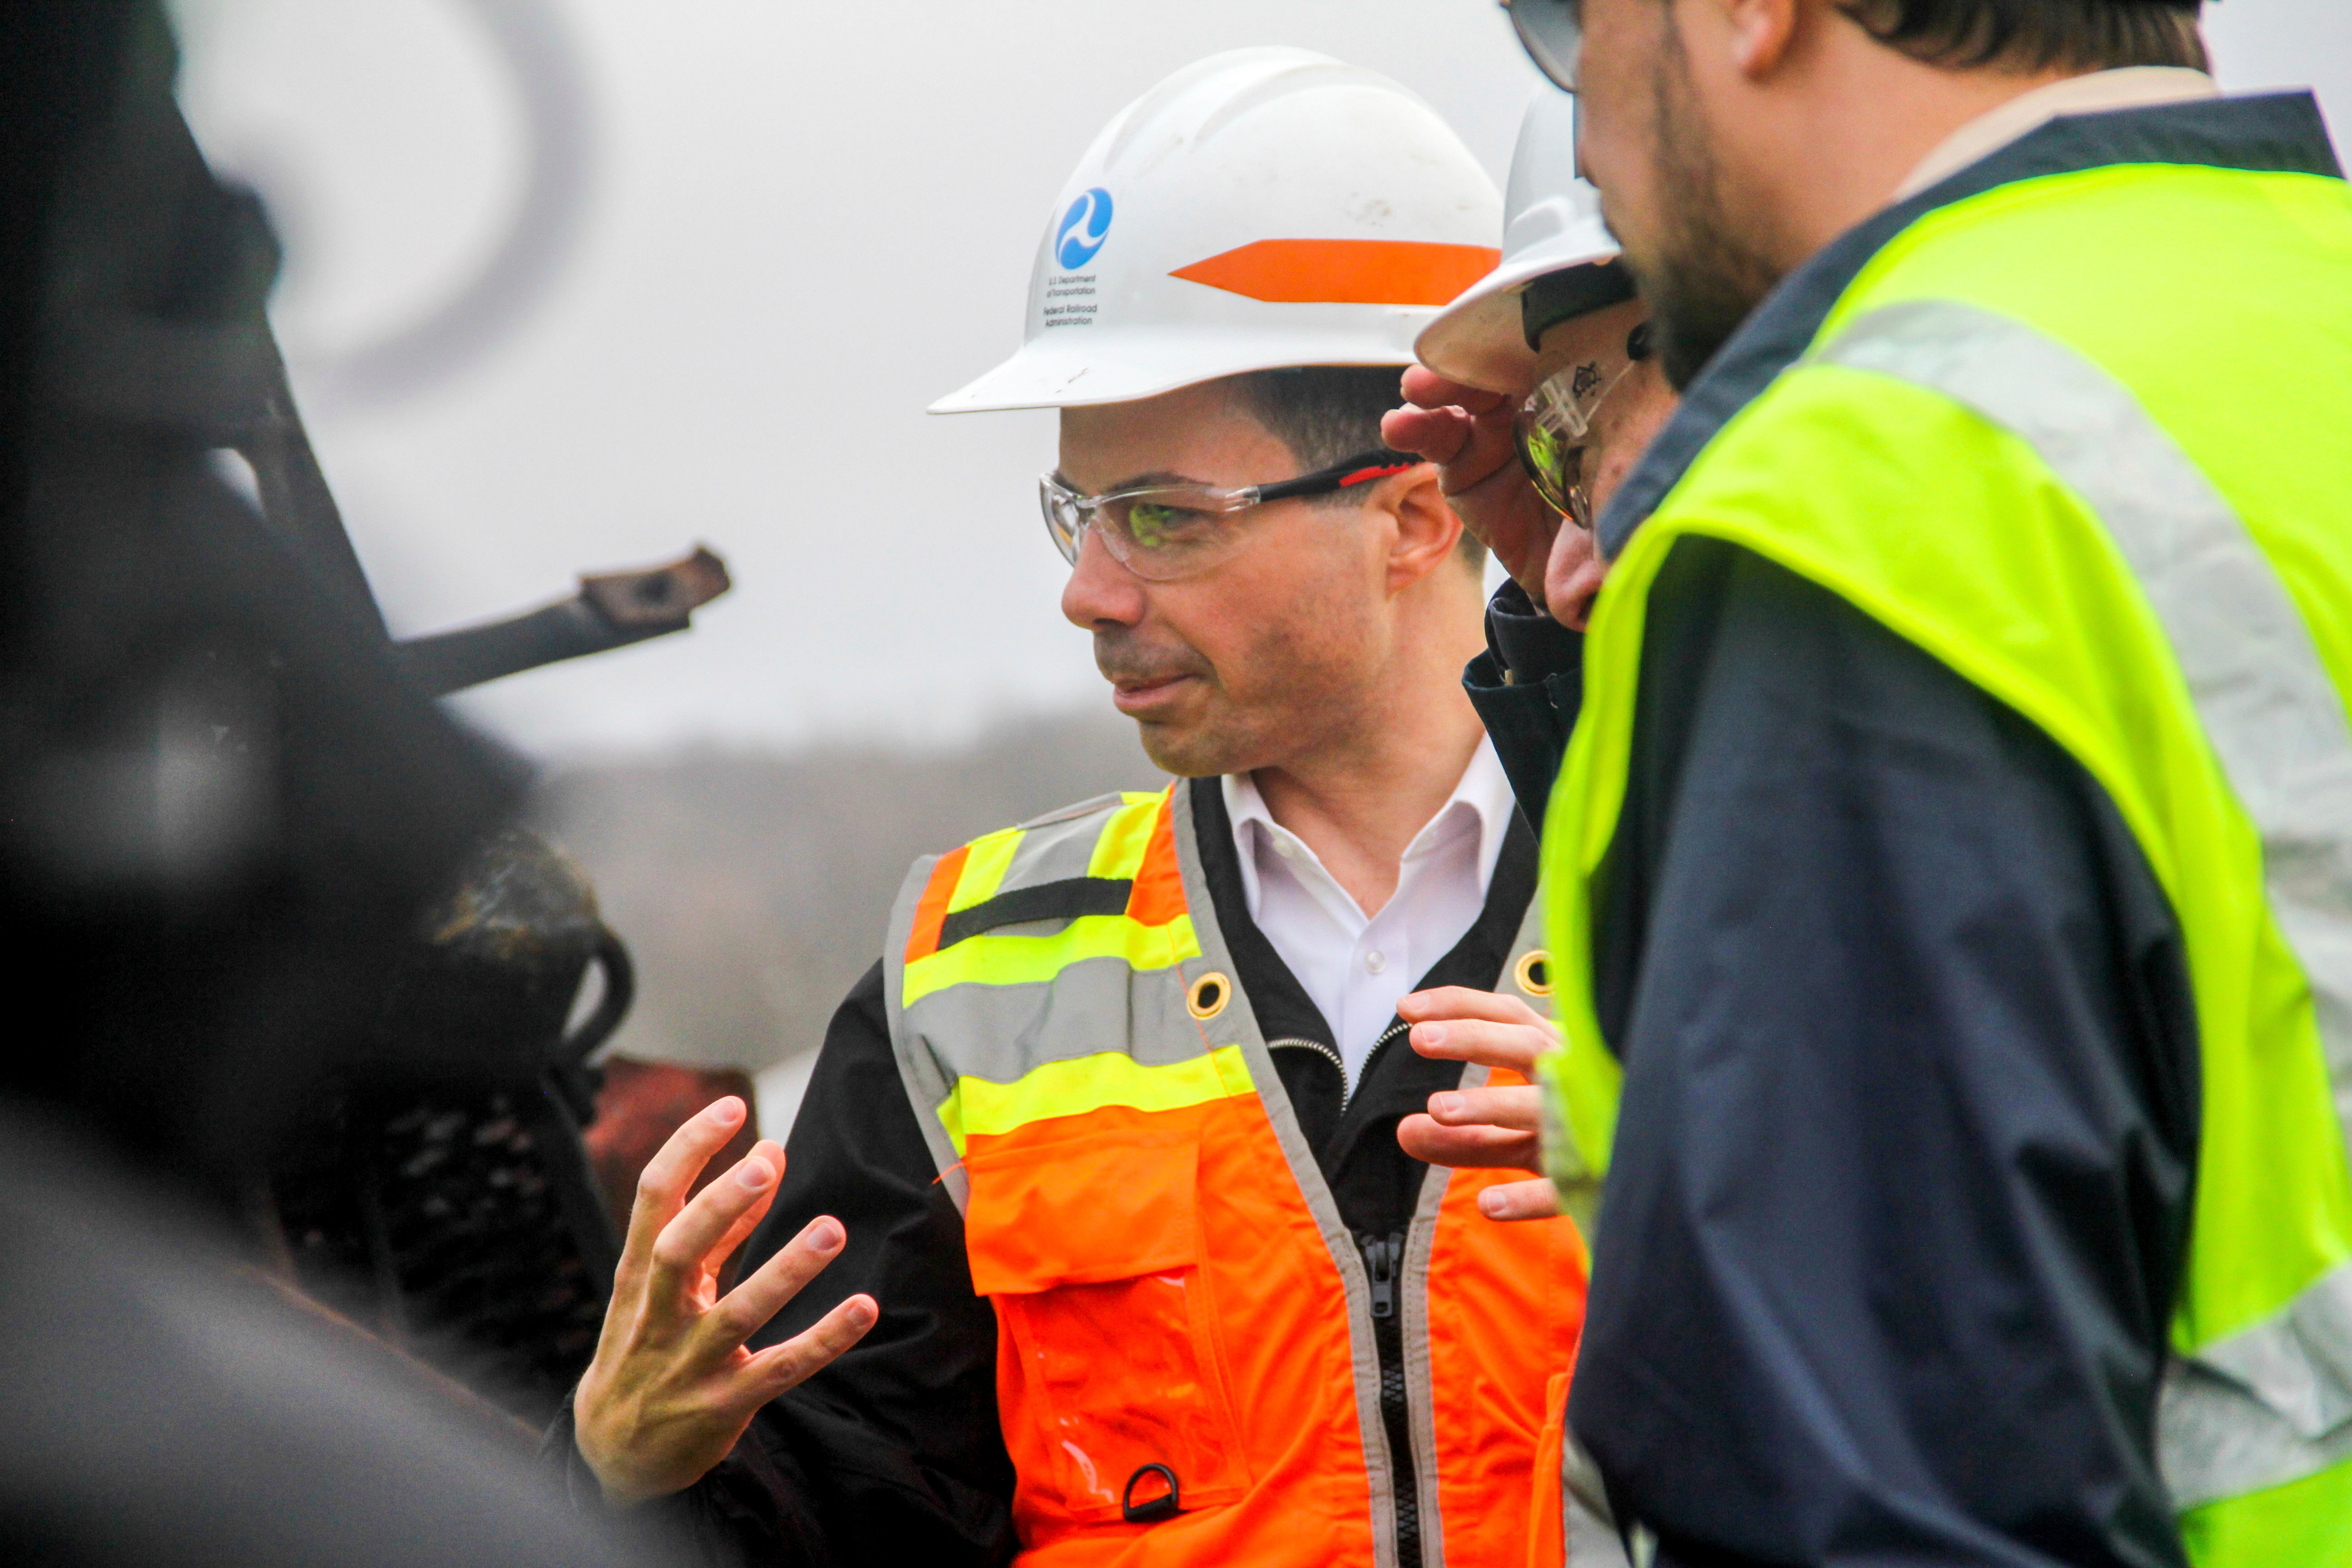 Pete Buttigieg admitted that he had waited too long to visit the East Palestine derailment site